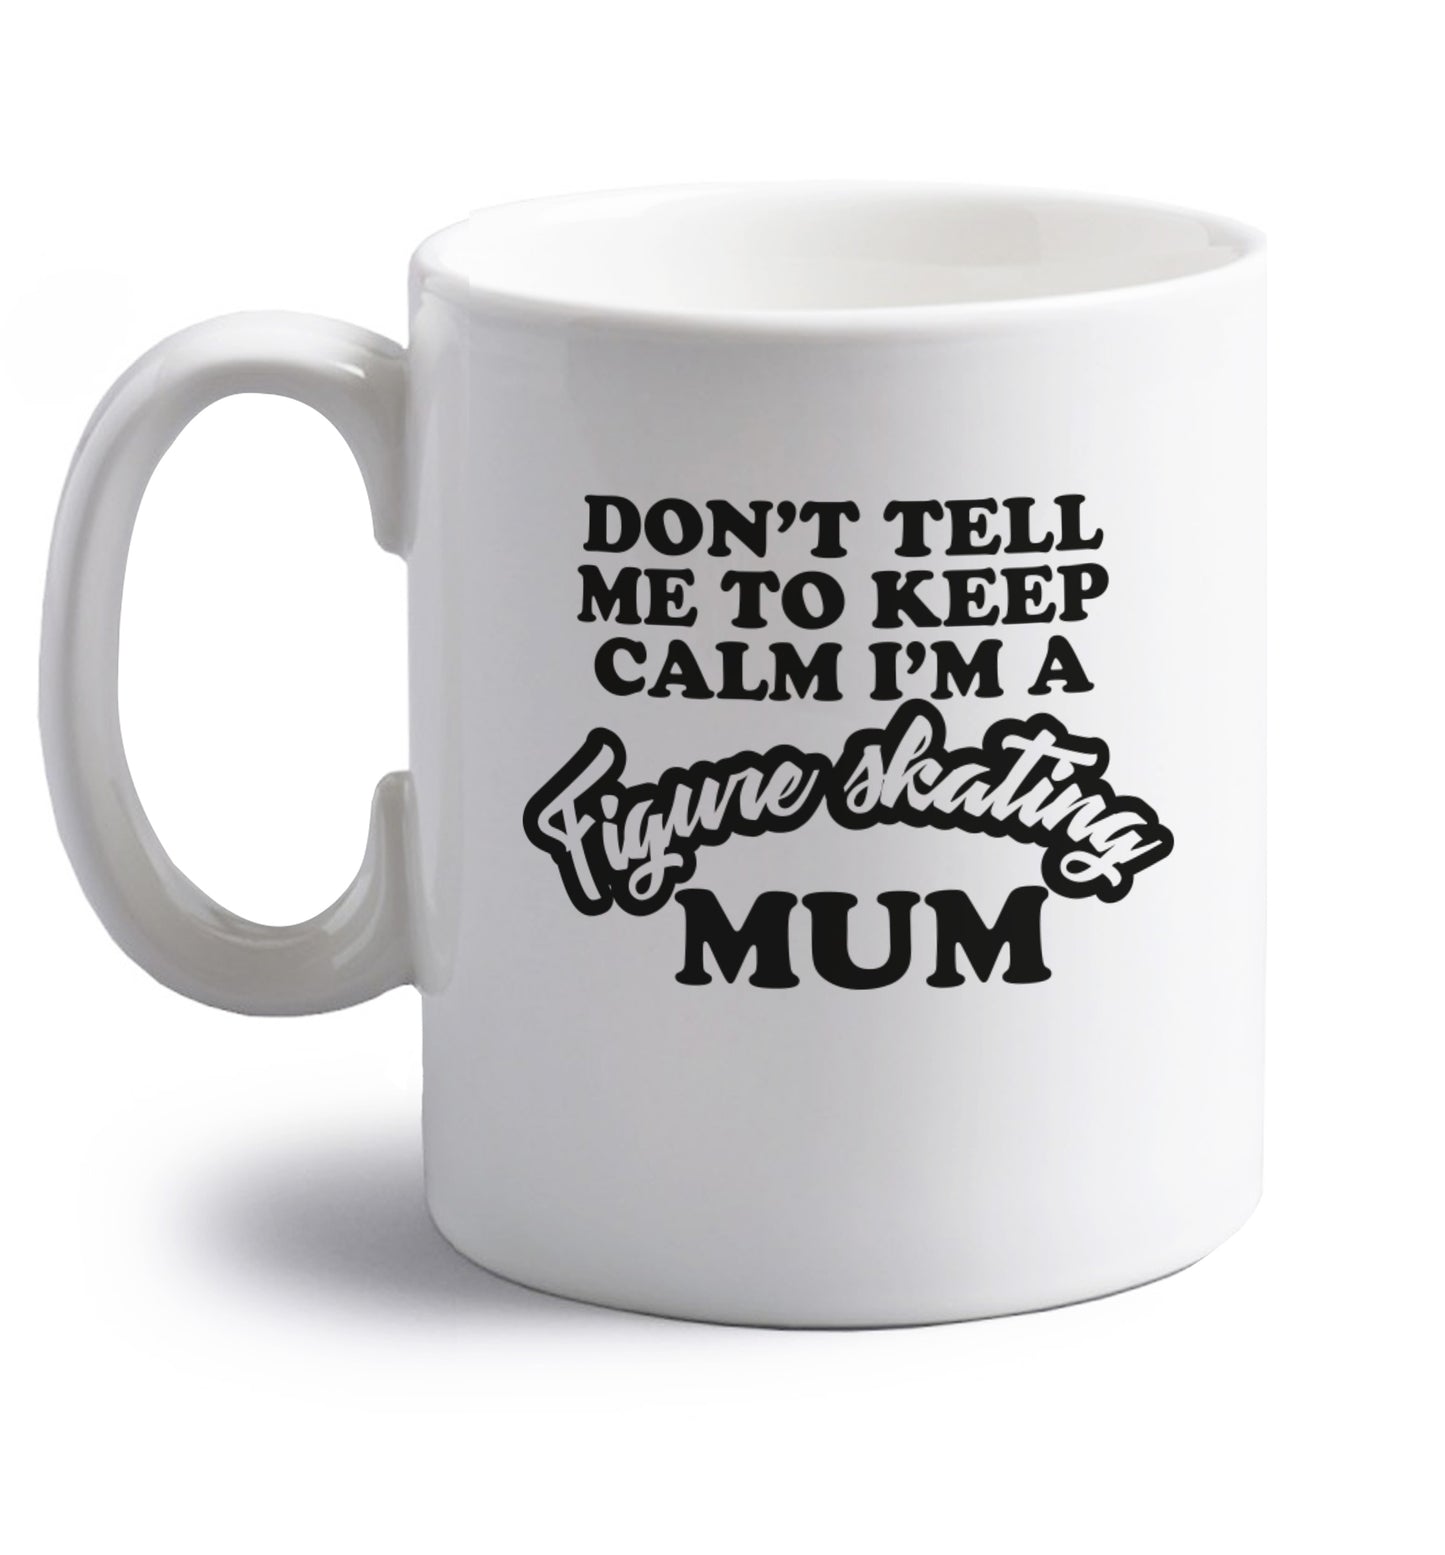 Don't tell me to keep calm I'm a figure skating mum right handed white ceramic mug 